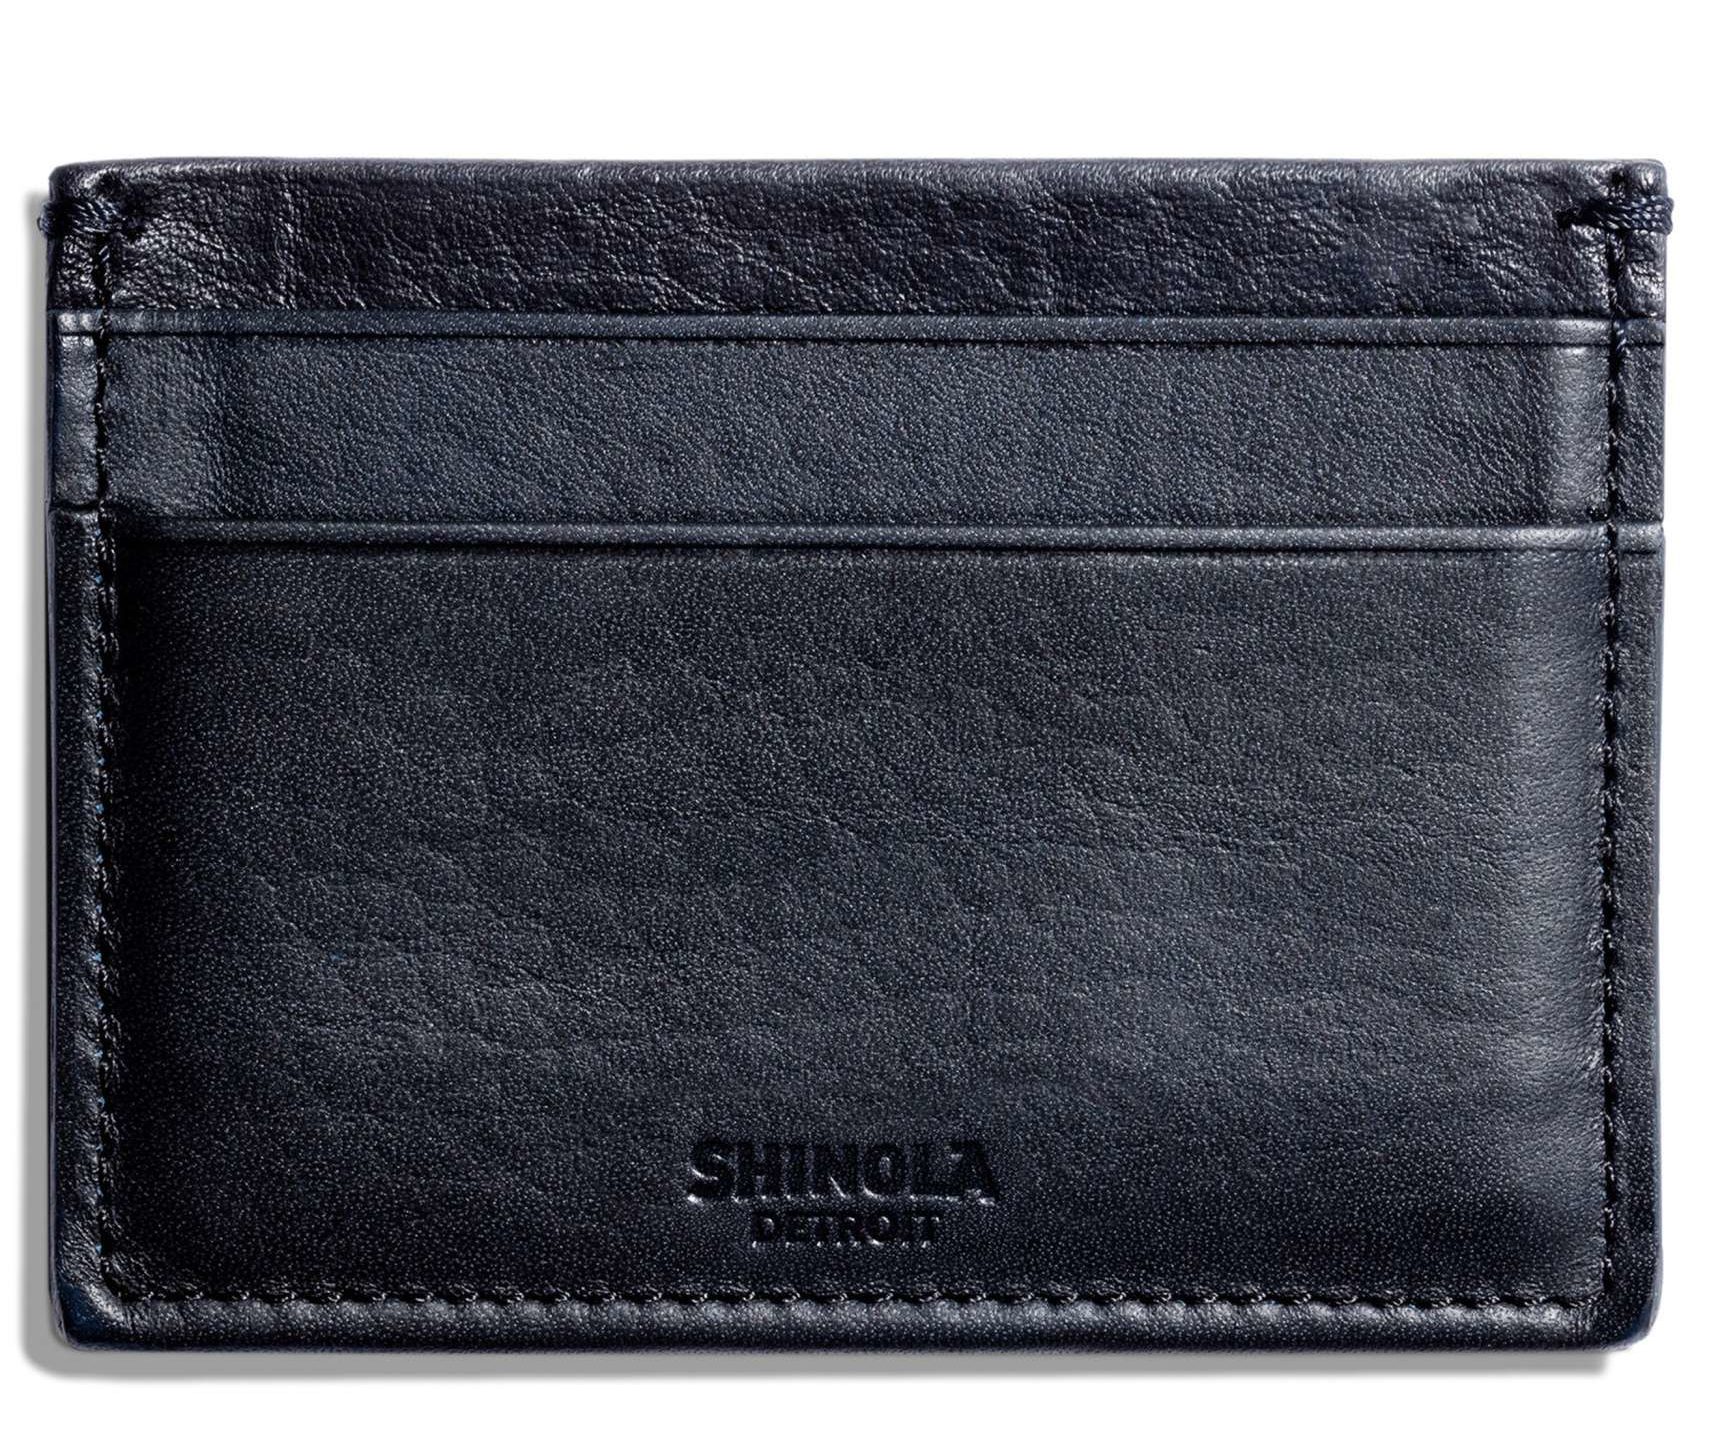 Best Uncle Gifts 2017: Shinola Card Case Wallet 2018